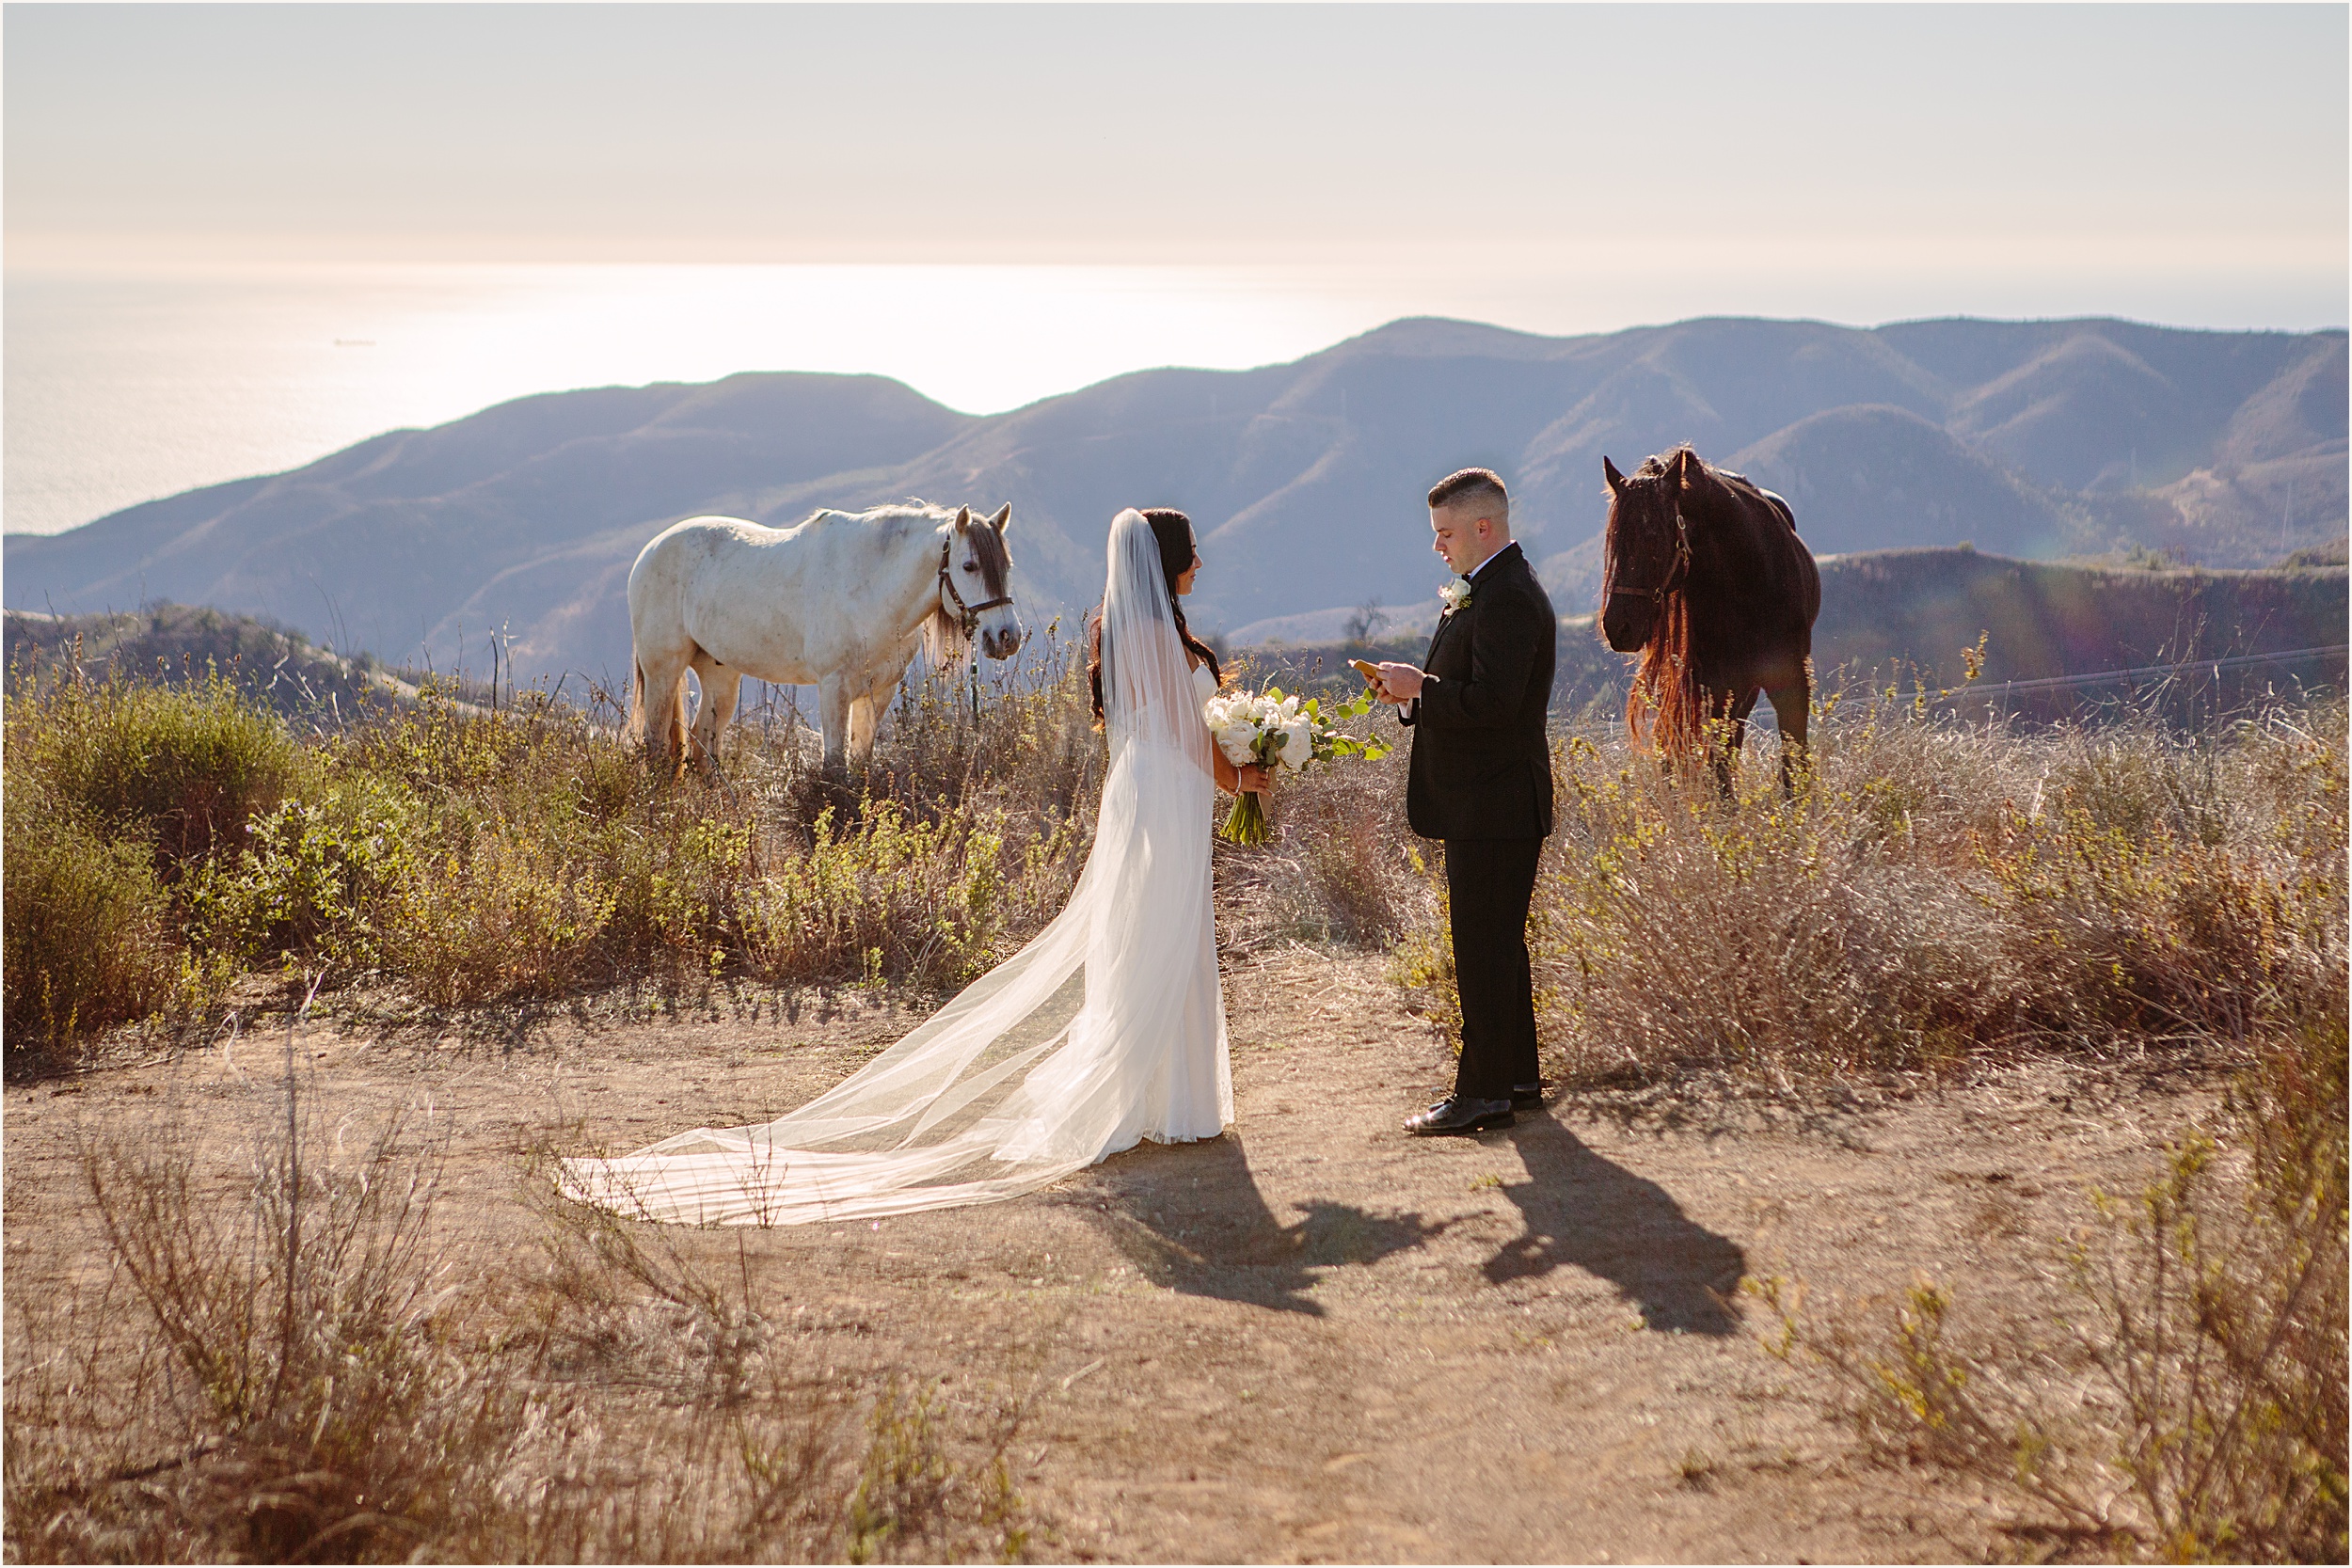 Photo of bride and groom exchanging vows with a white and brown horse in the background